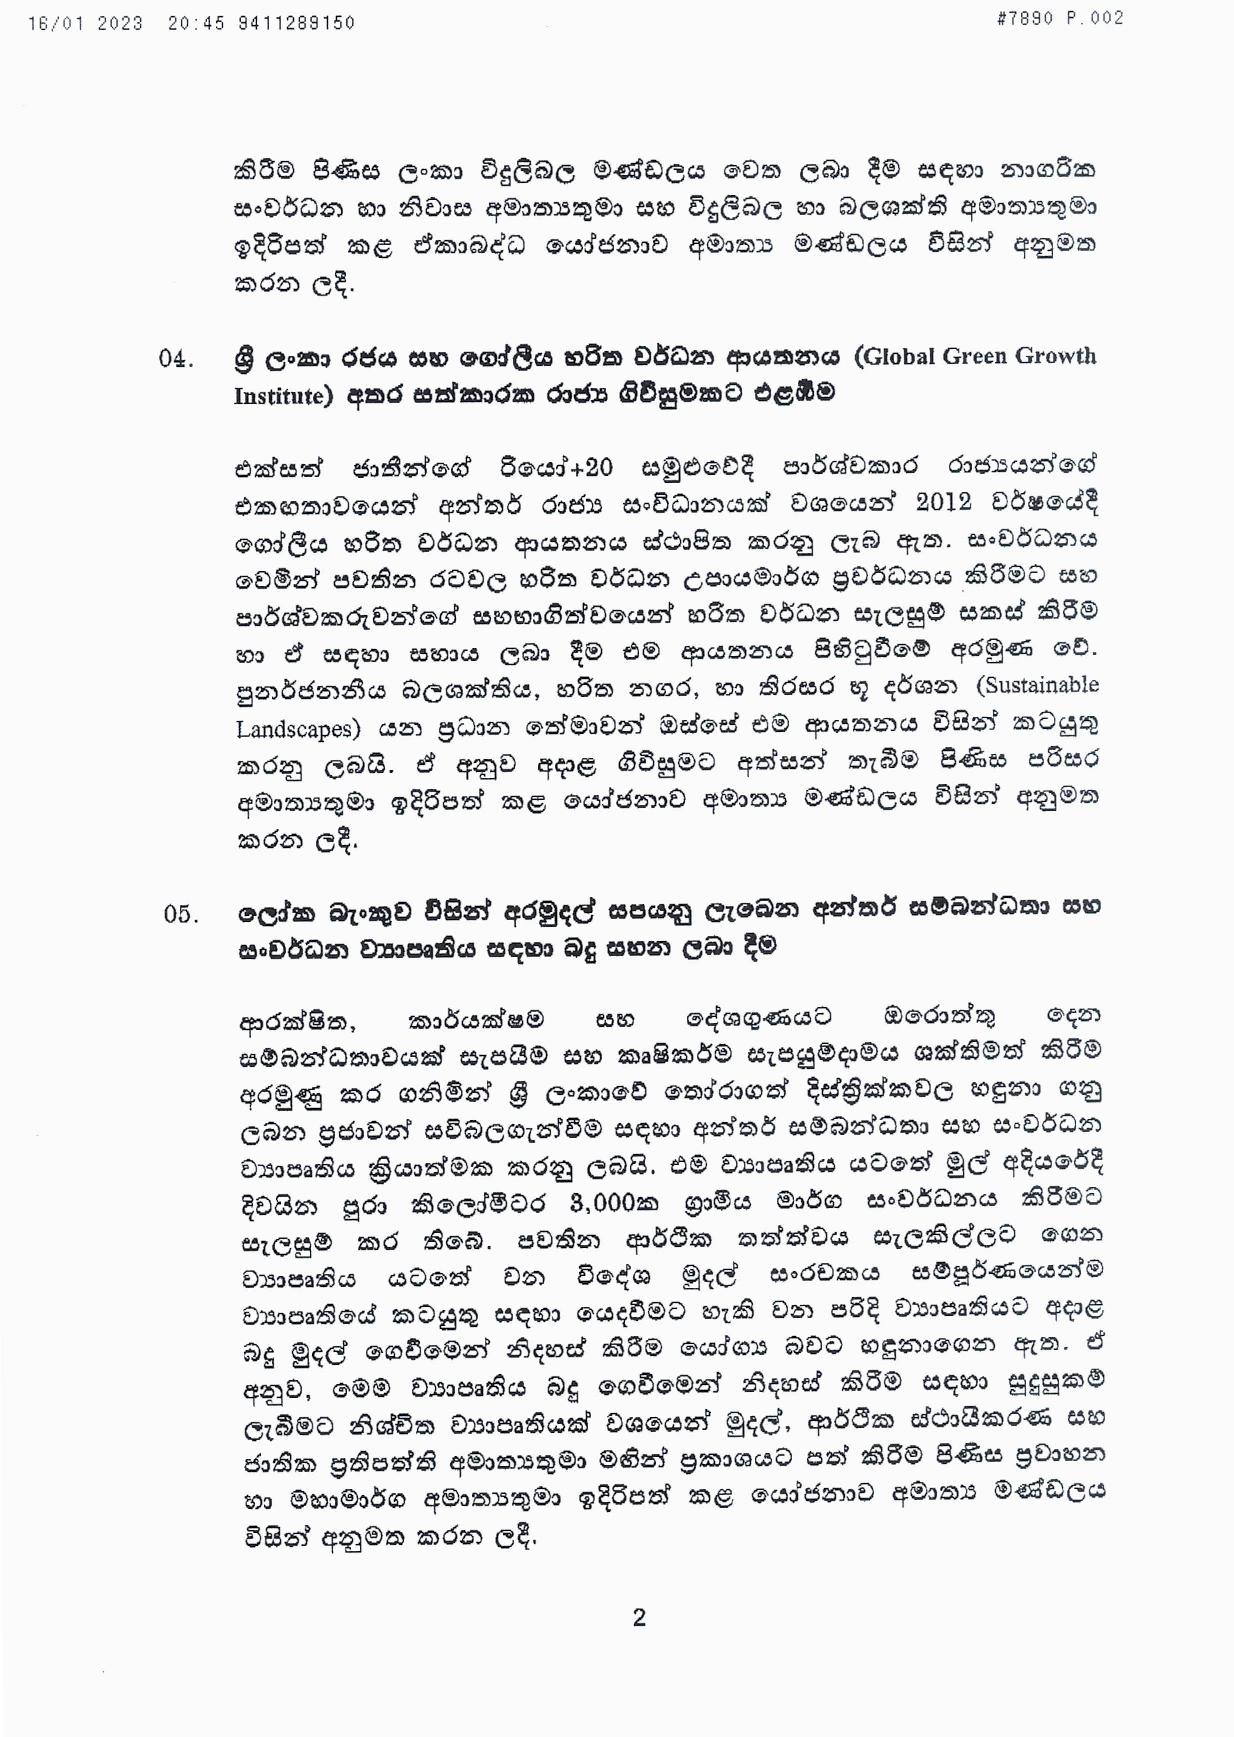 Cabinet Decision on 16.01.2023 page 002